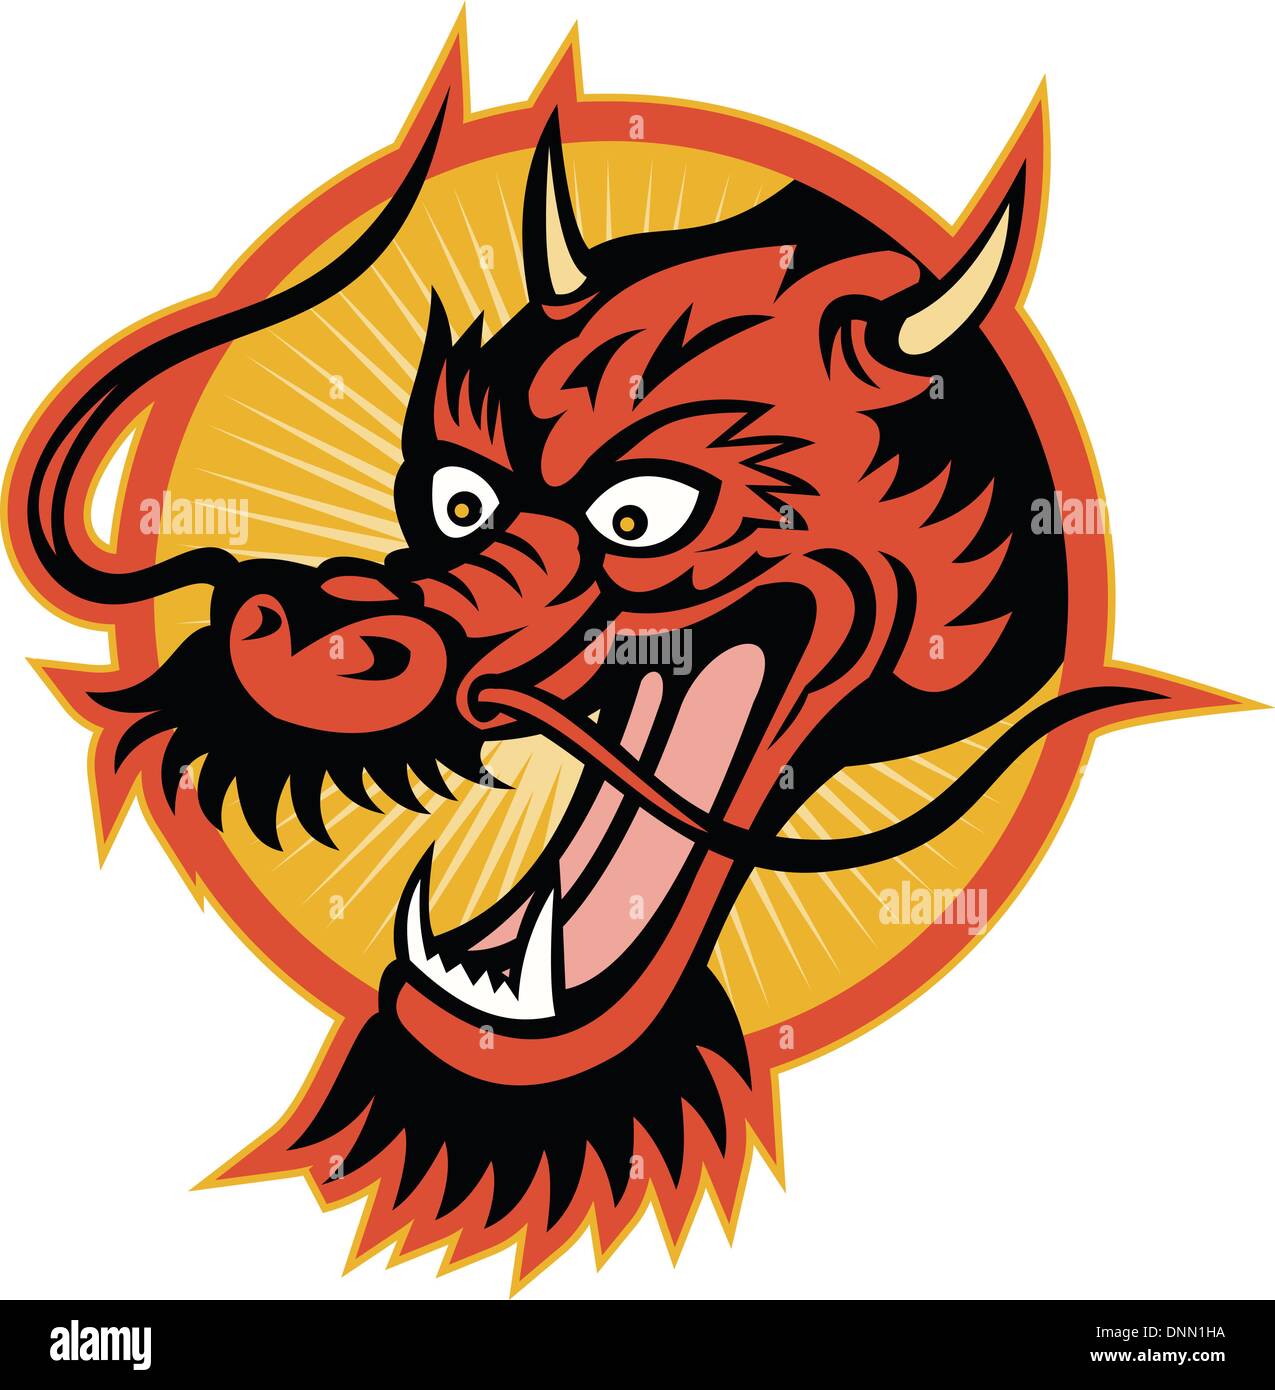 Illustration of a Chinese style red dragon head set inside circle done in retro style. Stock Vector